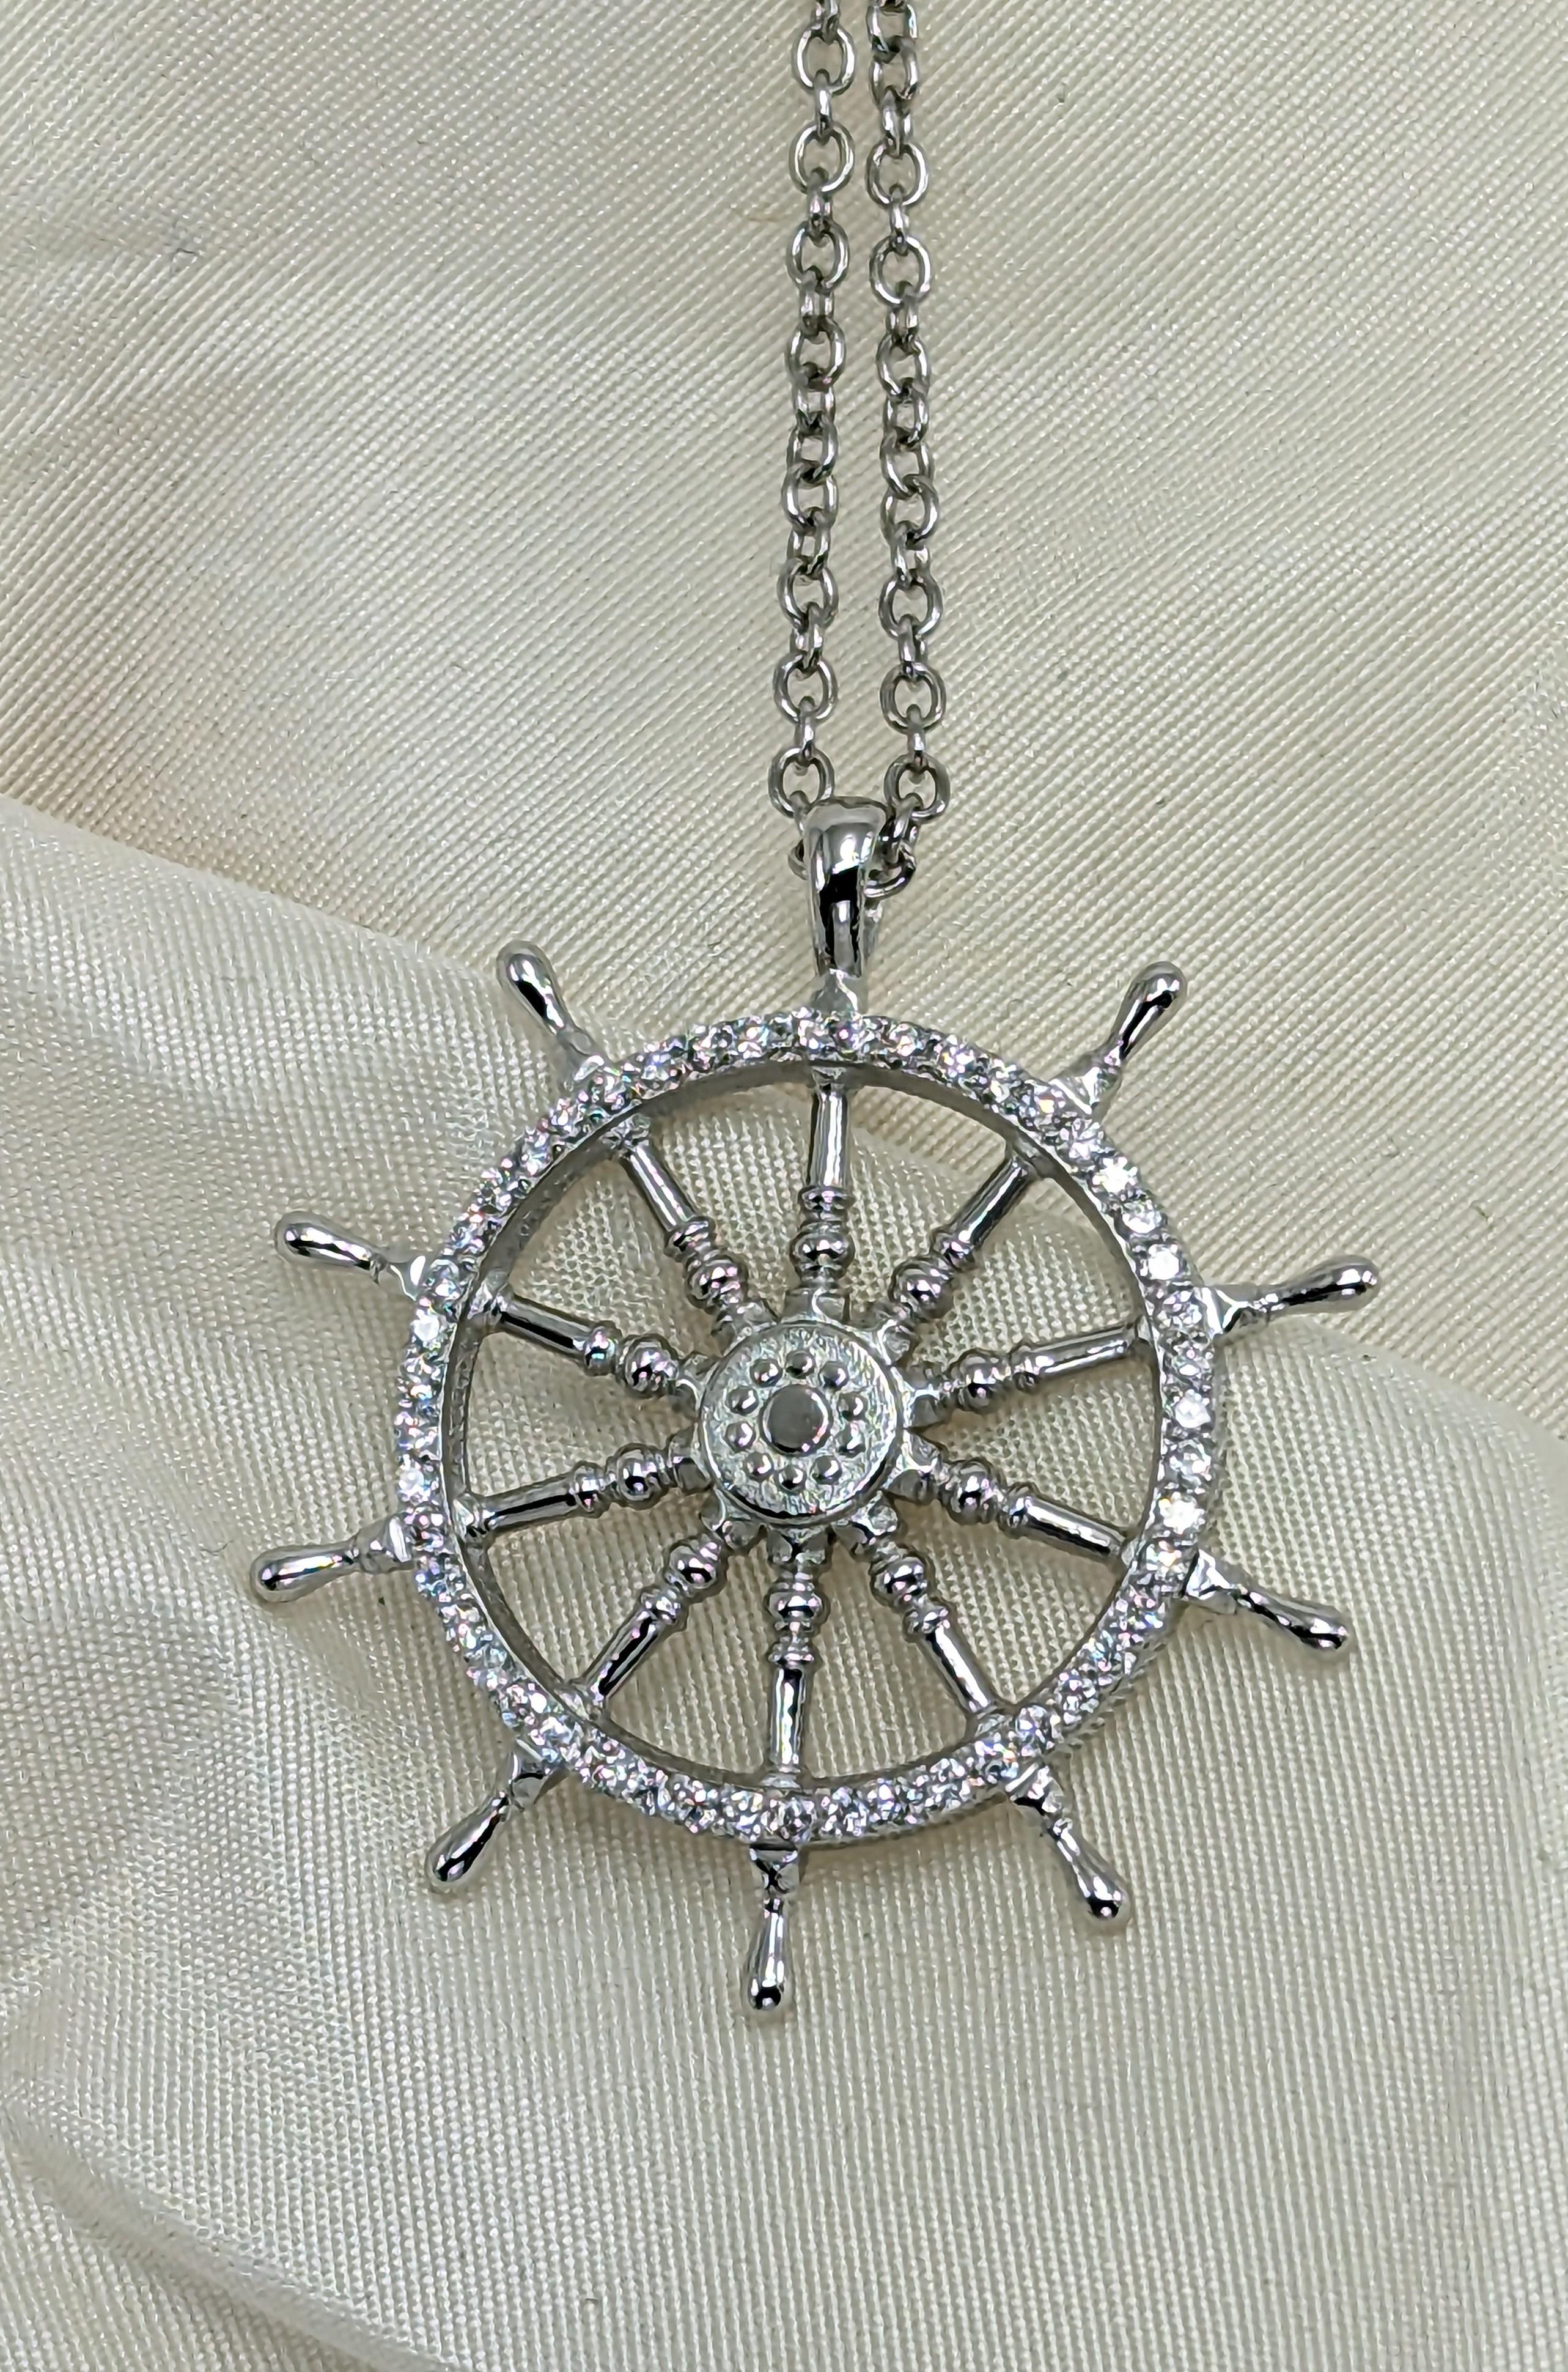  Platinum and Diamond Captain Sailors Diamond Wheel Pendant, For you  sailors ,water, and wind lovers. Tiffany Designer , Thomas Kurilla has not forgotten you mates. Calling all ocean lovers. Get on the water or in the water, don't just stand there